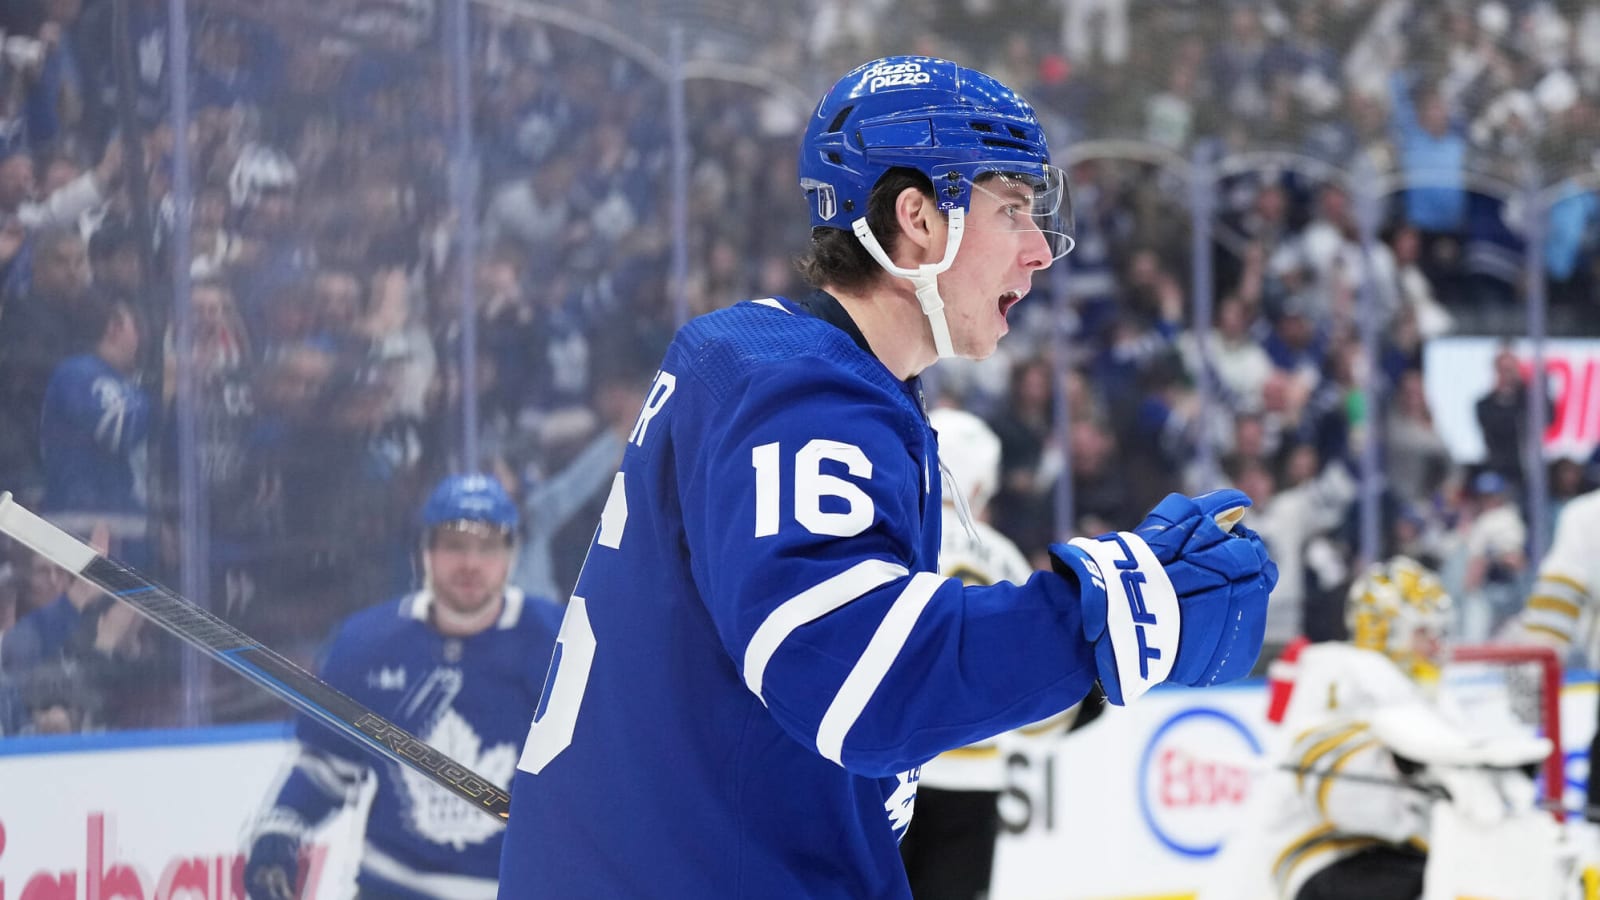 Pitchforks Are Out For Maple Leafs’ Mitch Marner